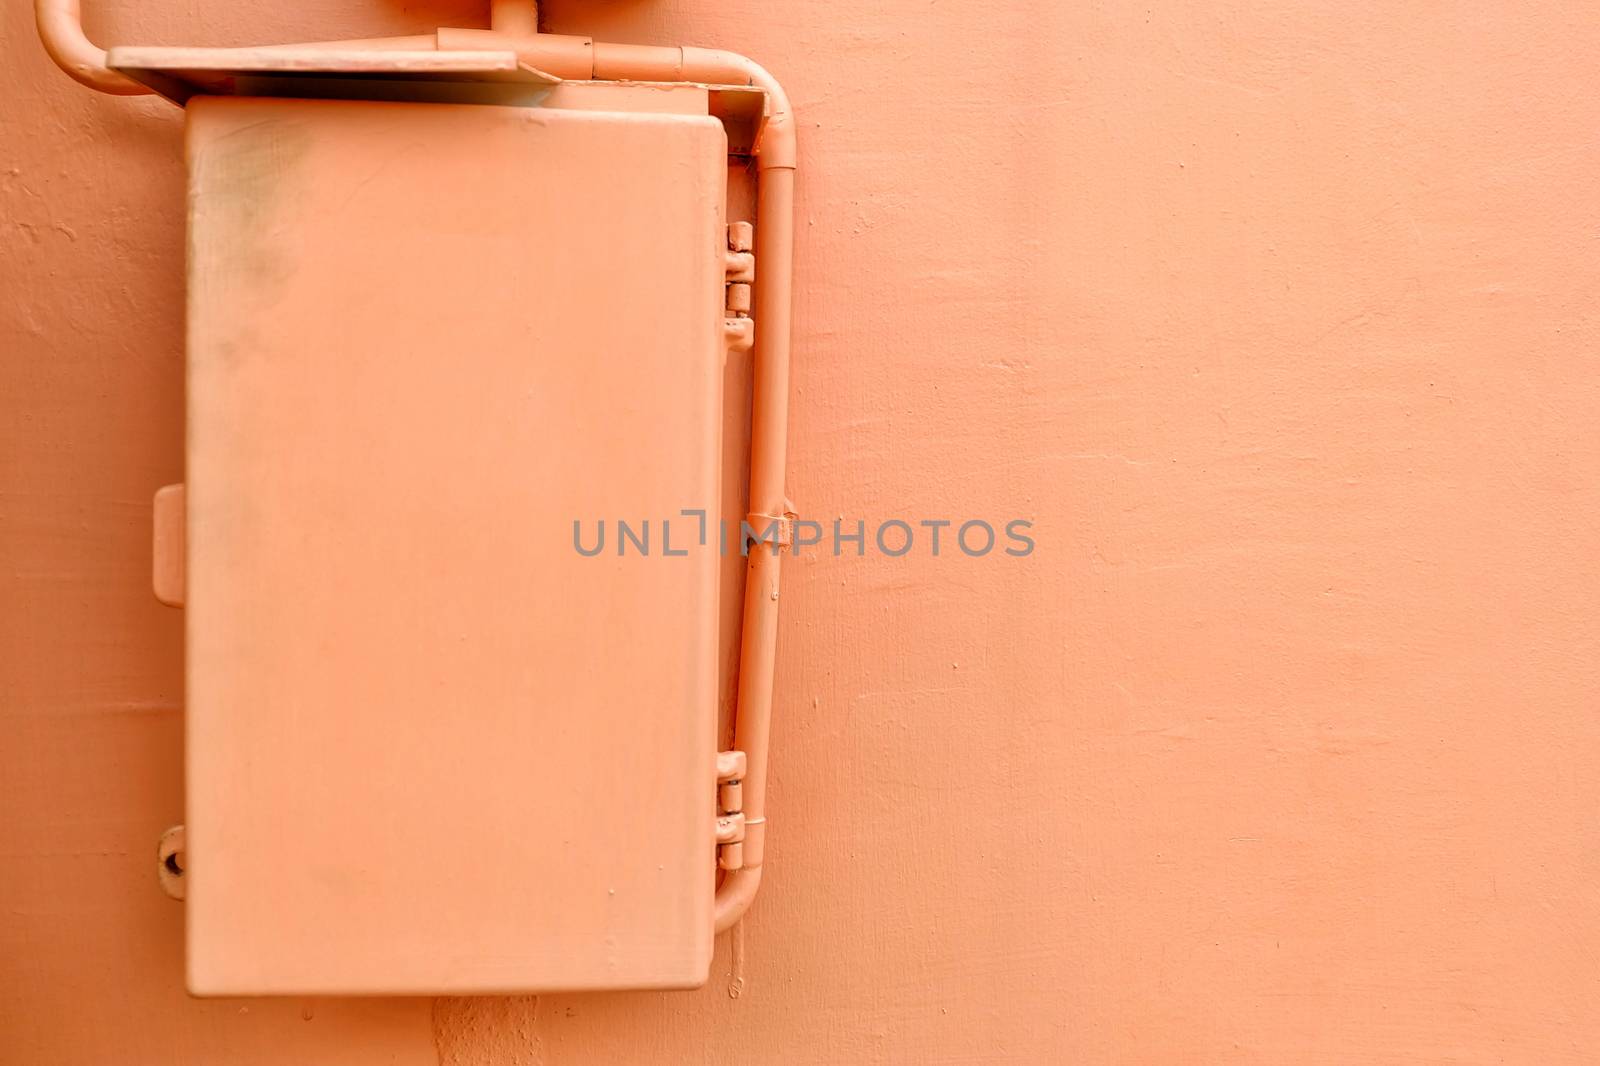 Electric Box with Flesh Tone Concrete Wall Background. by mesamong